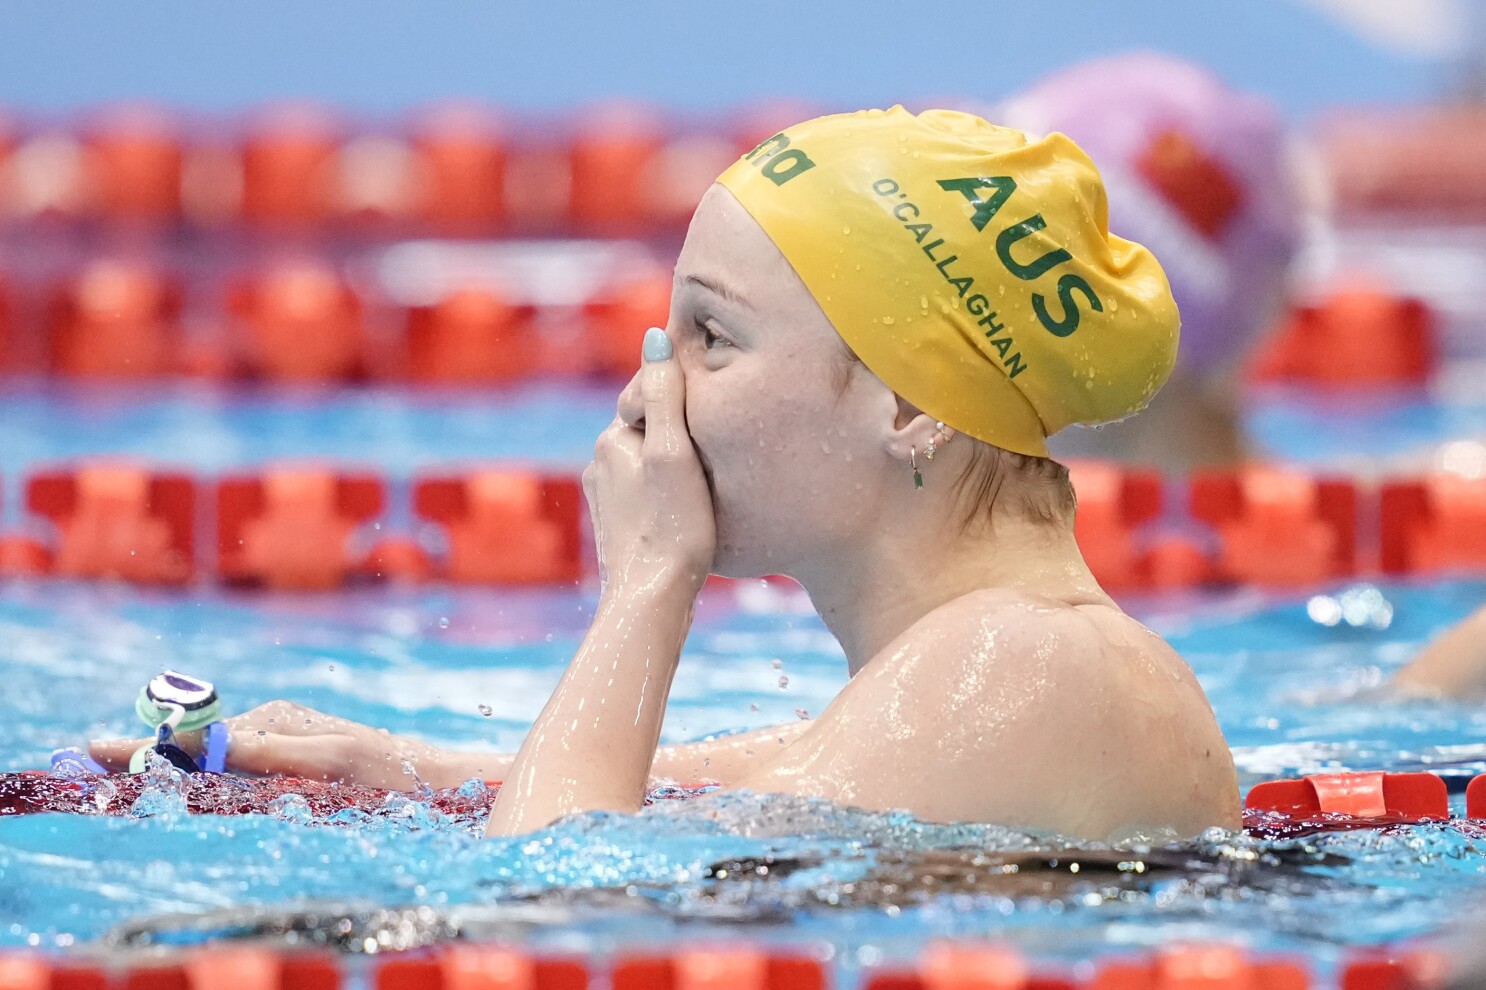 Mollie O'Callaghan sets a world record at the swimming worlds and